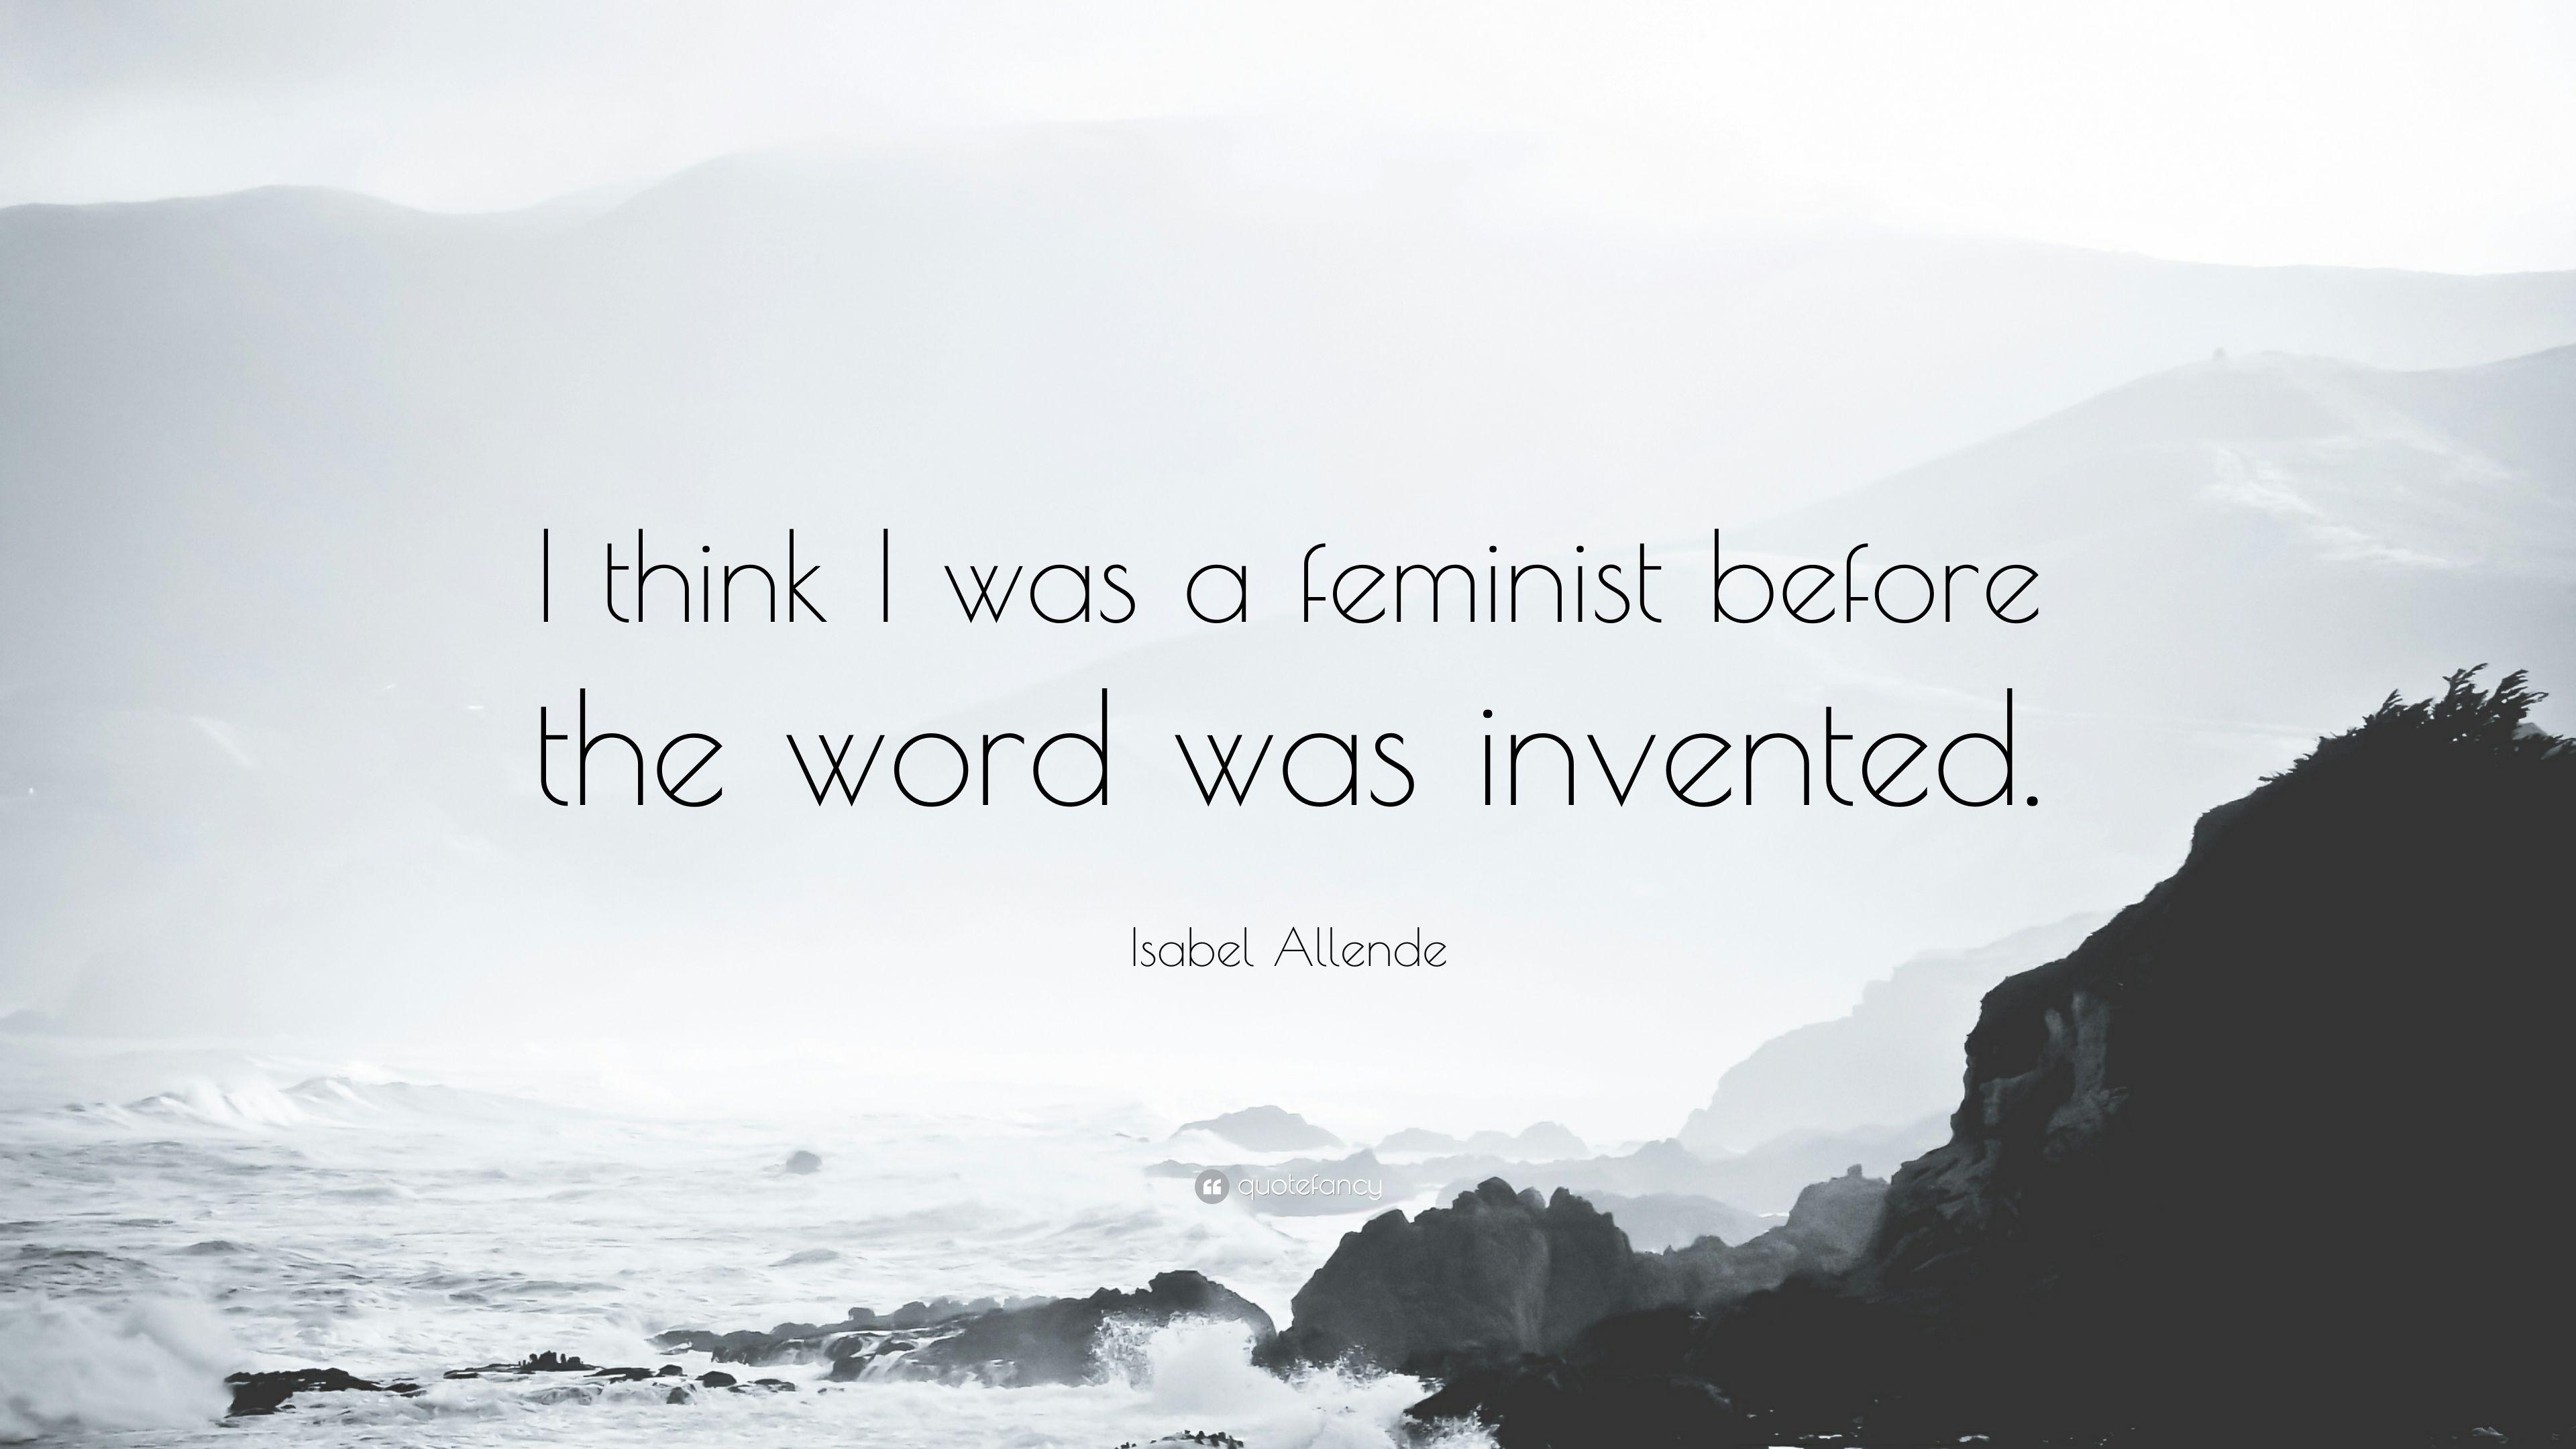 Isabel Allende Quote: “I think I was a feminist before the word